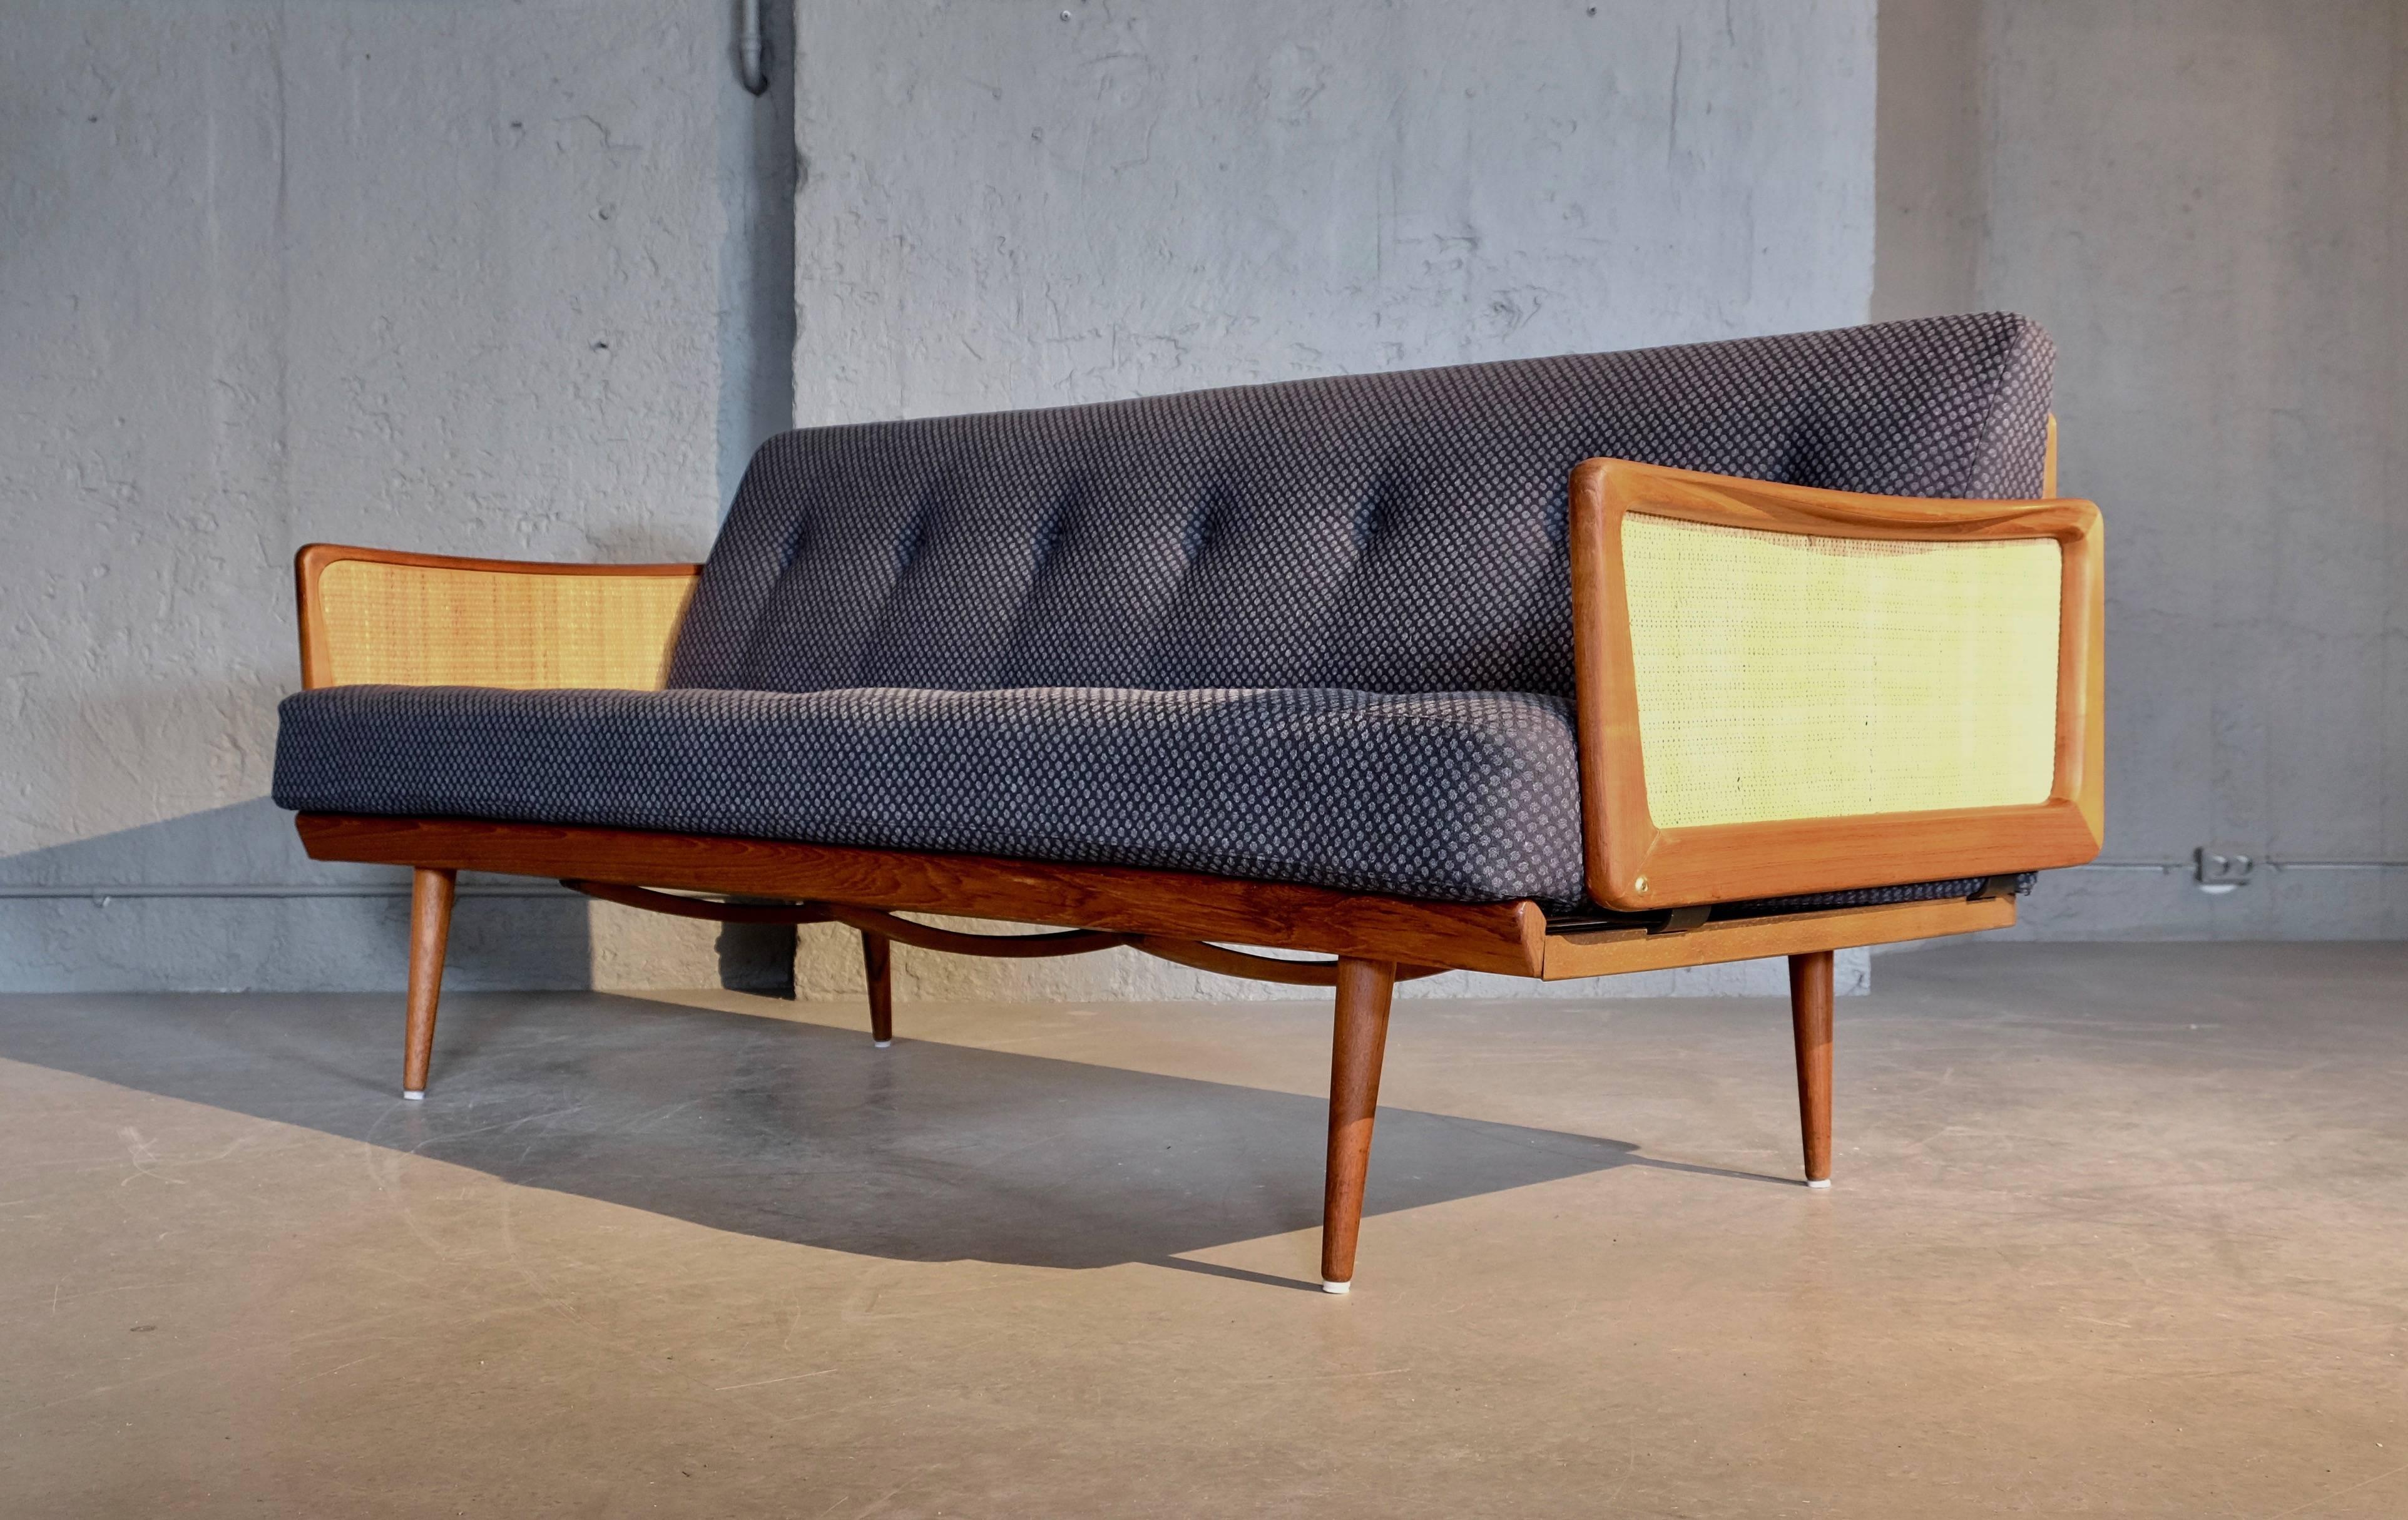 Produced by France & Son in Denmark
Teak and blue/grey fabric.